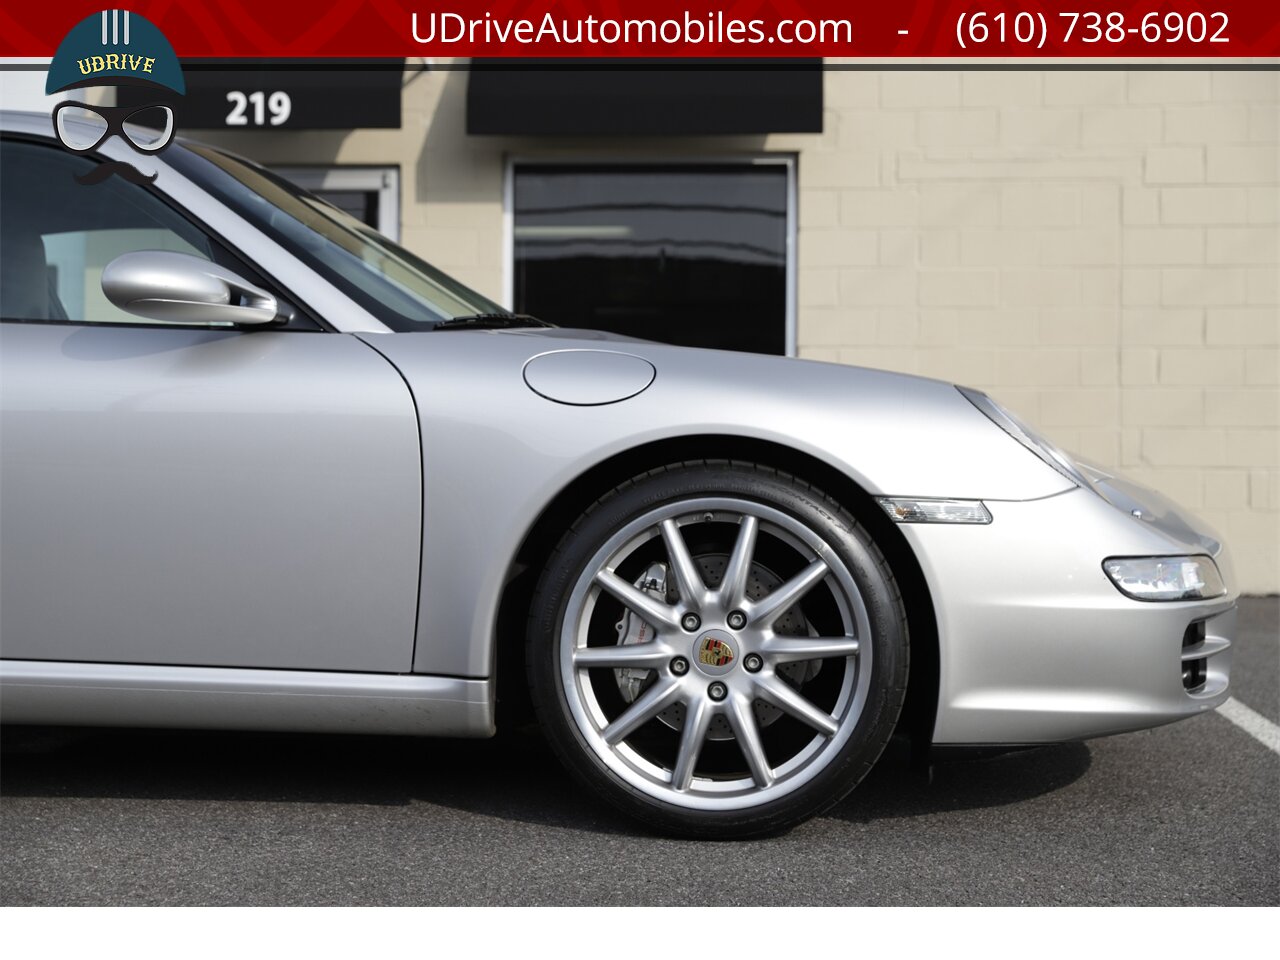 2006 Porsche 911 997 Carrera Coupe 6 Speed 19in Whls Immaculate   - Photo 15 - West Chester, PA 19382